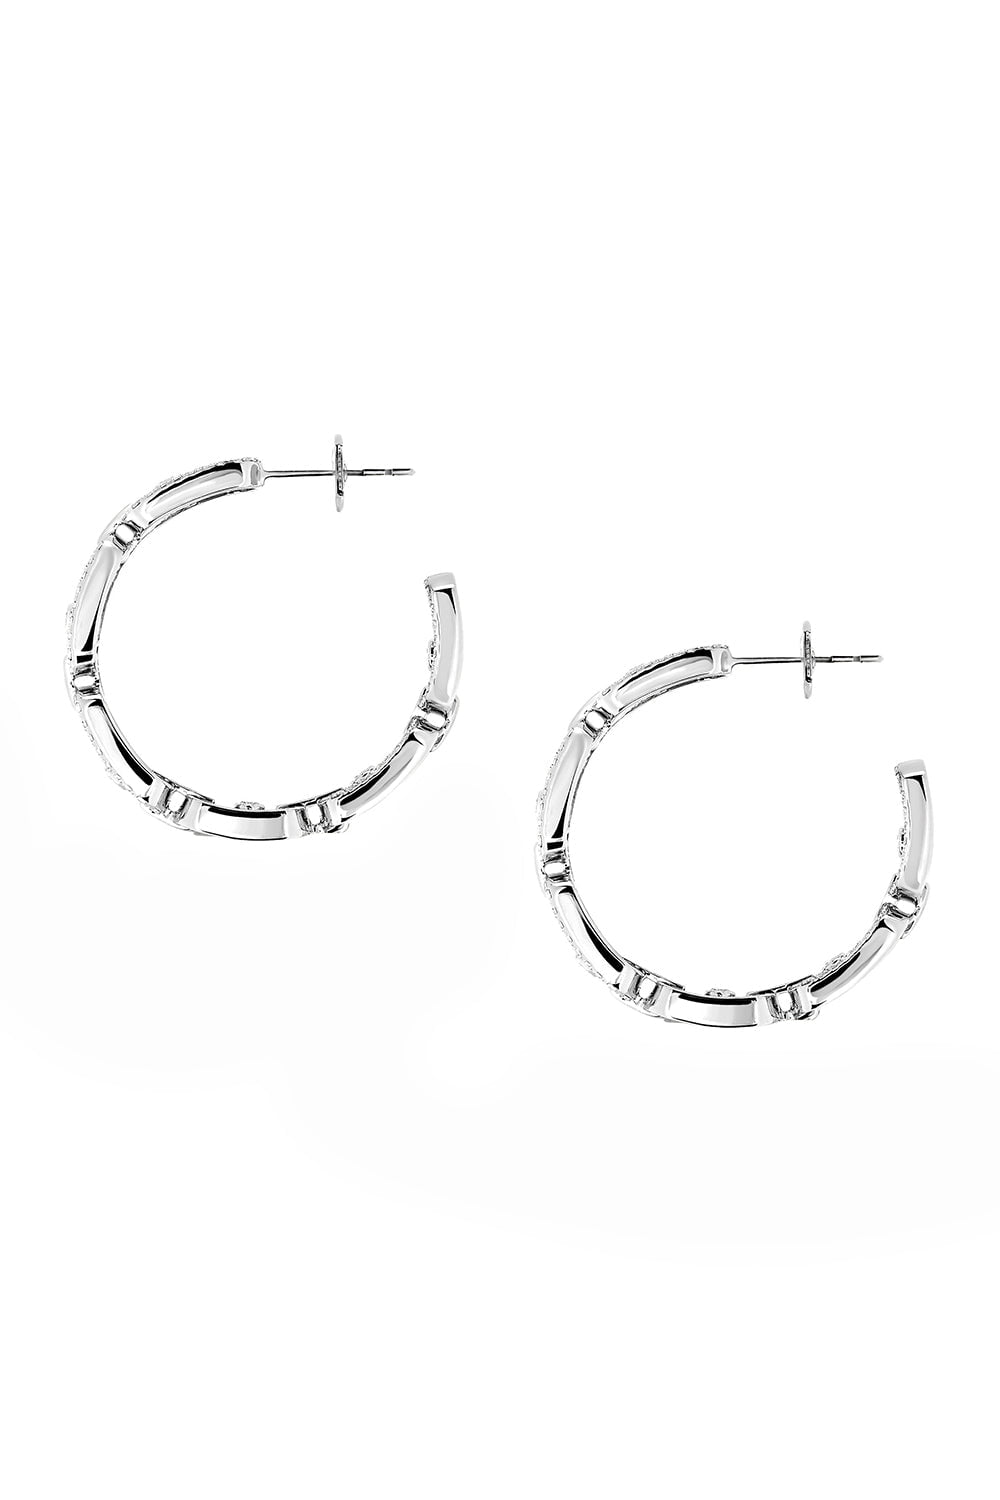 MESSIKA-Move Link Small Hoop Earrings-WHITE GOLD